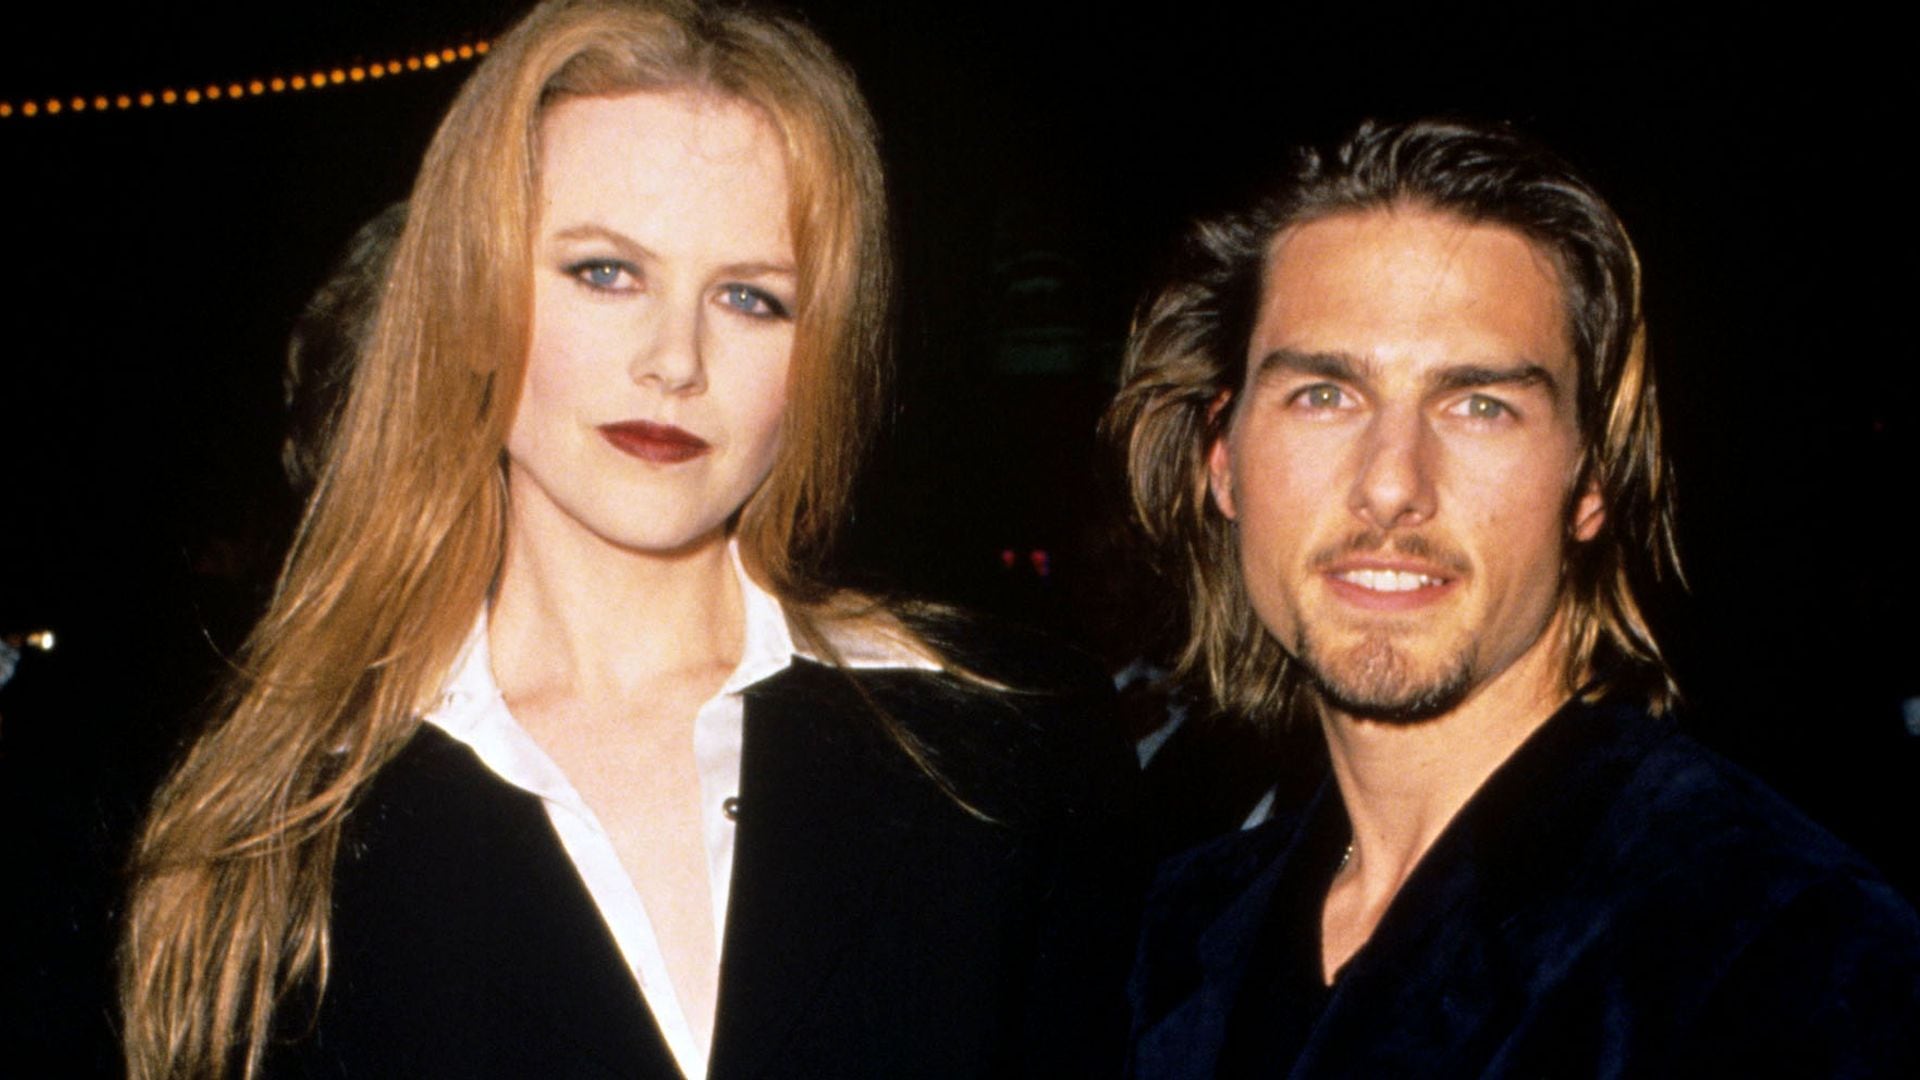 Nicole Kidman opens up about the movie she and Tom Cruise made 25 years ago